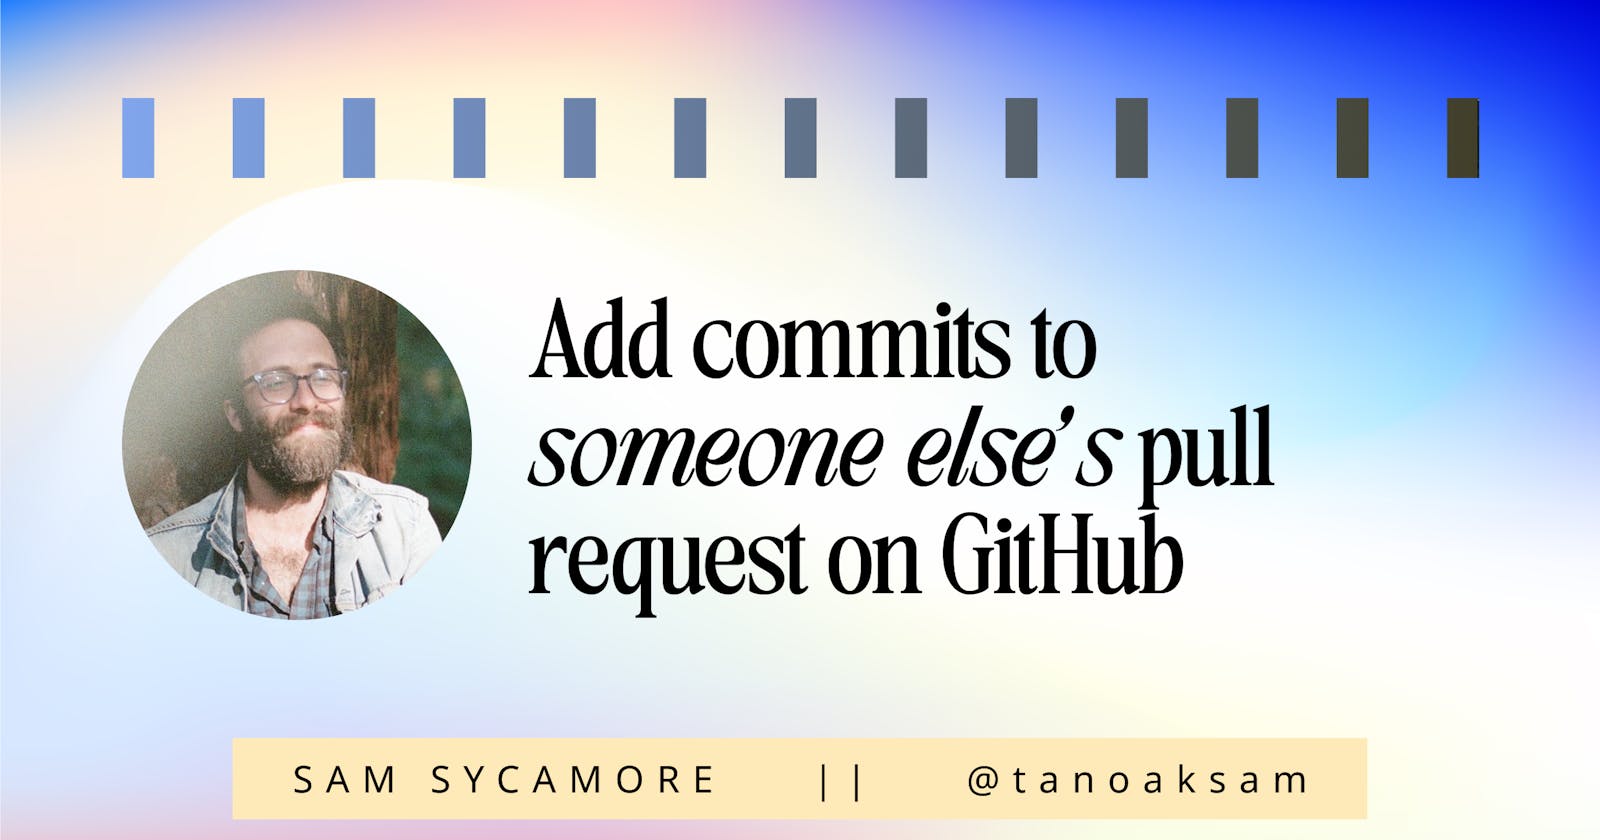 How to add commits to someone else's pull request on GitHub